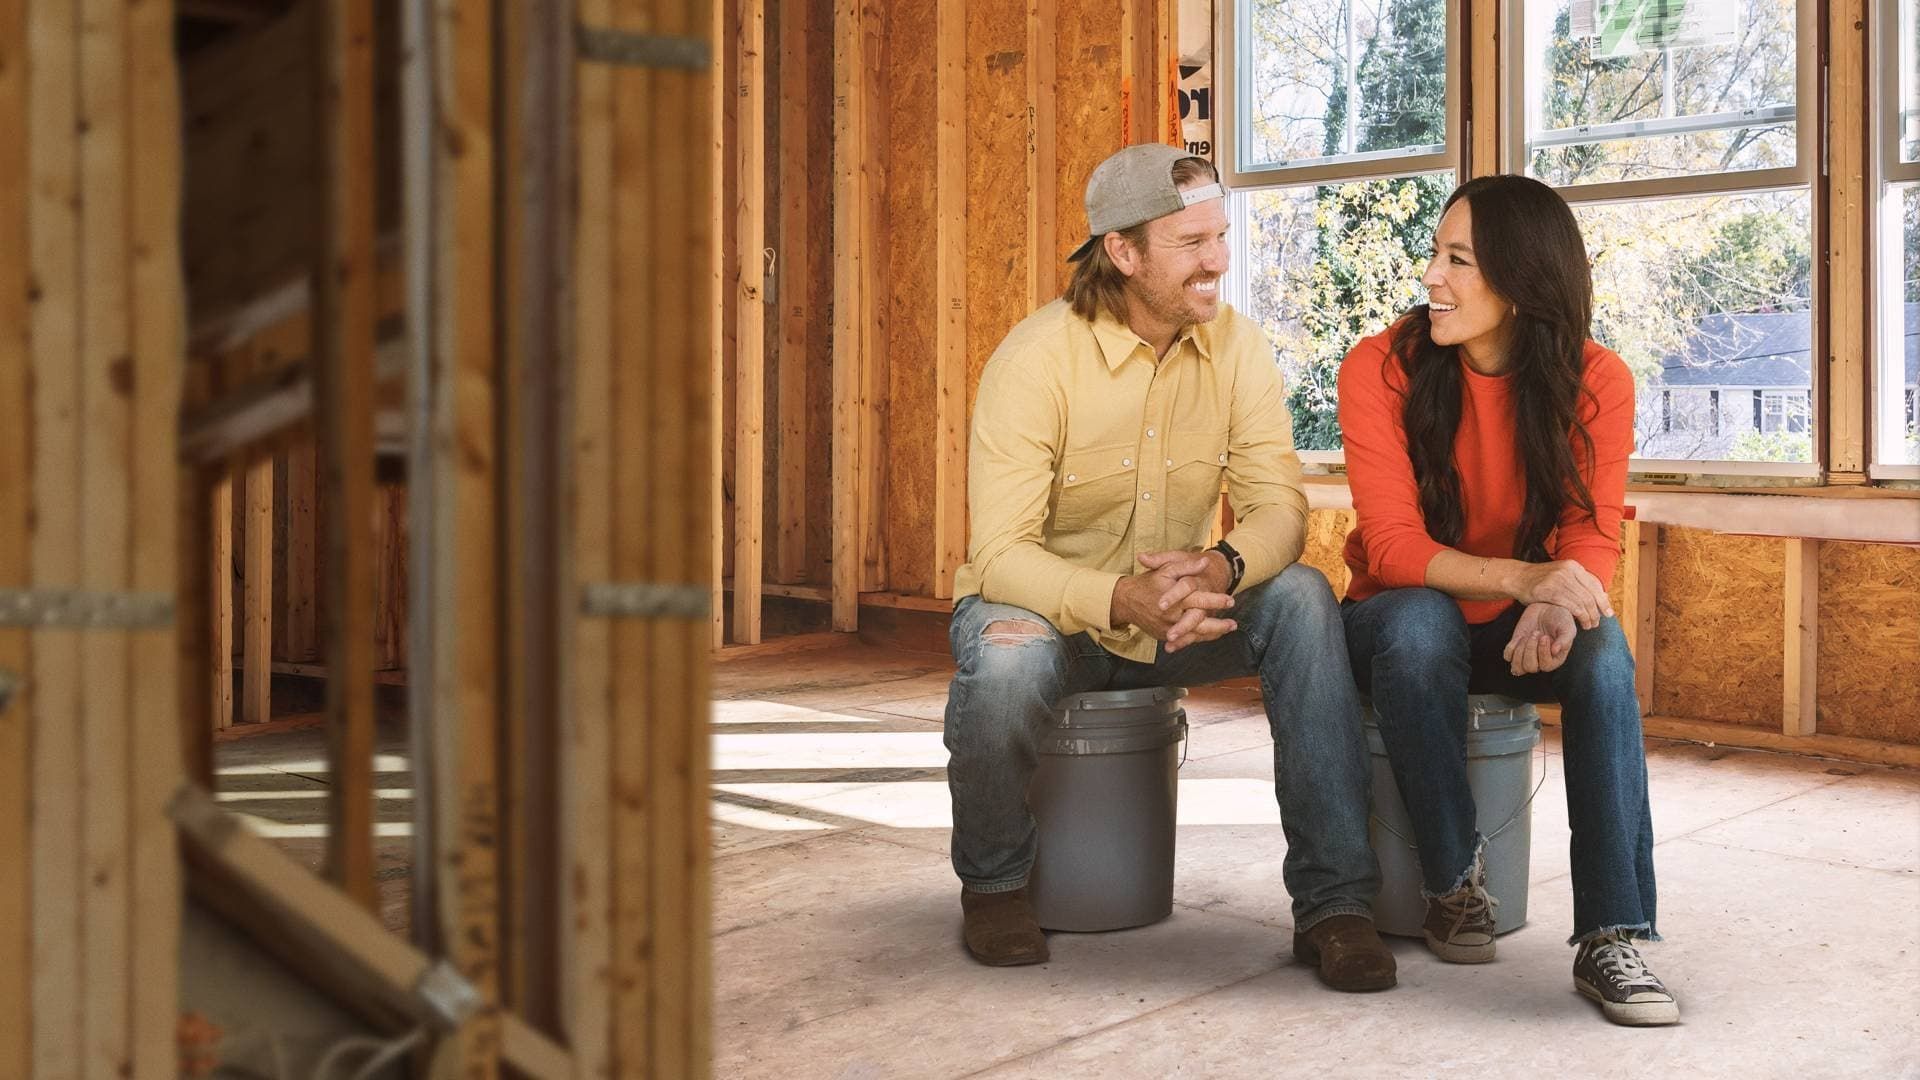 Fixer Upper: Welcome Home background